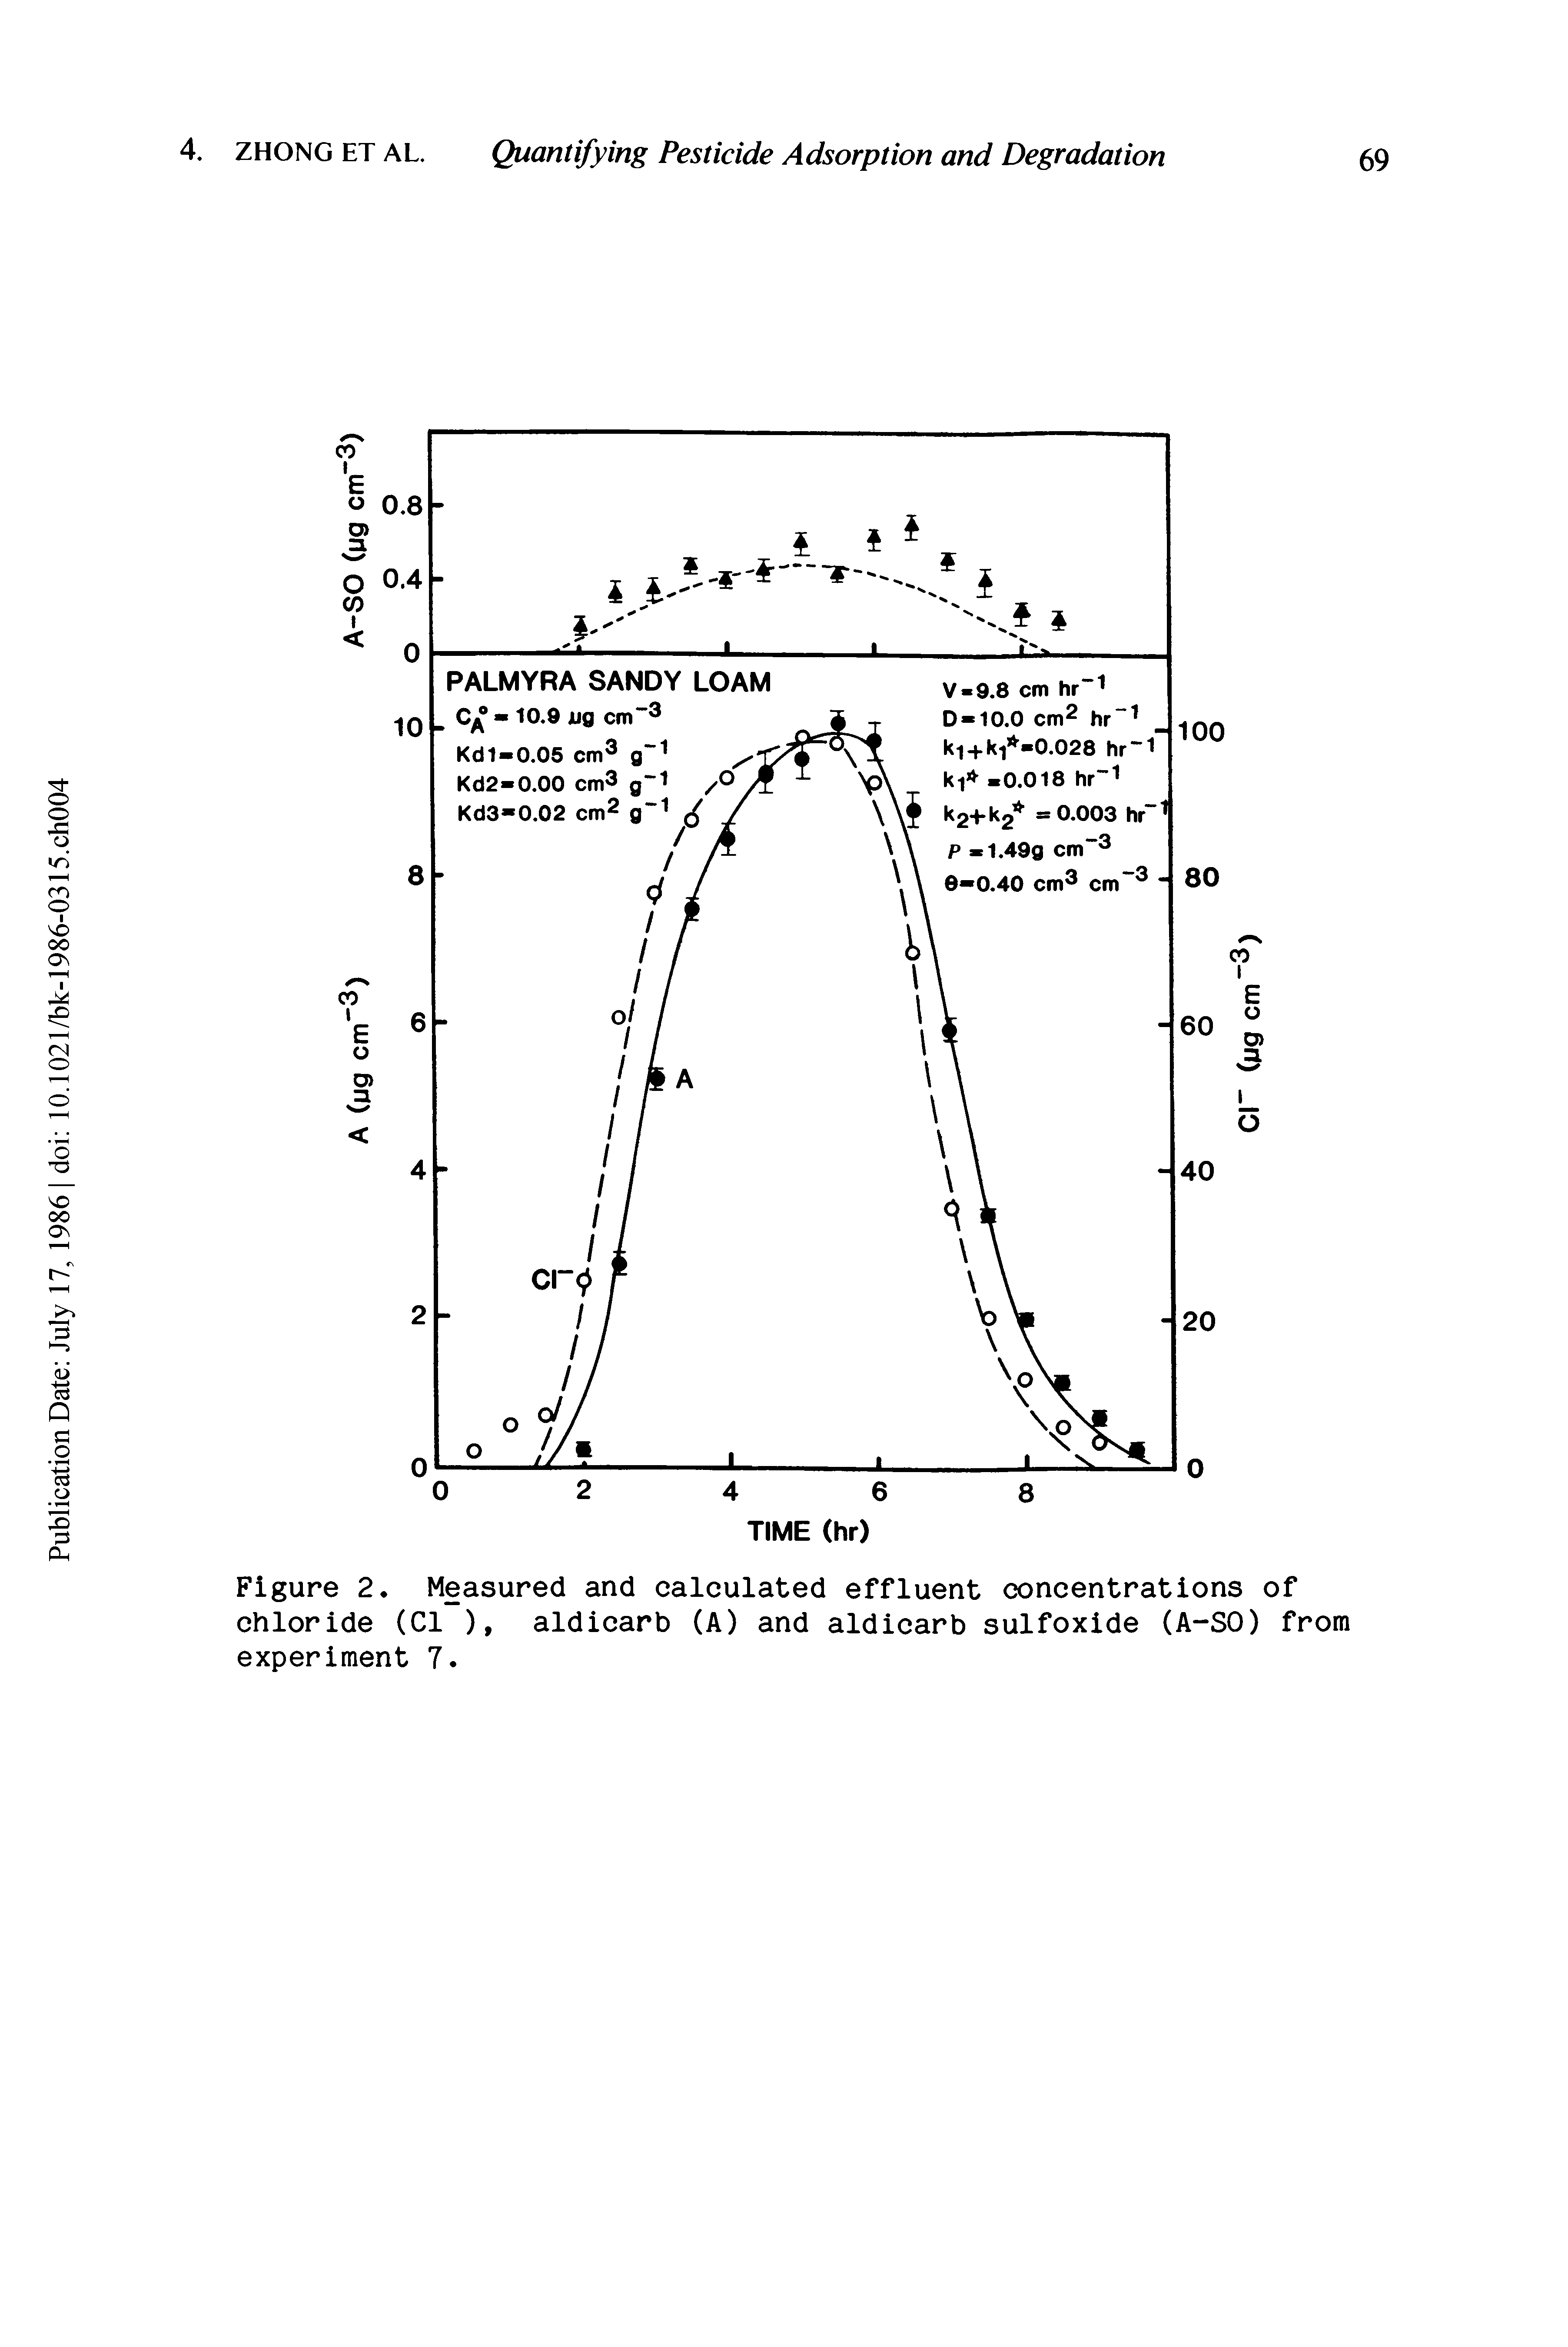 Figure 2. Measured and calculated effluent concentrations of chloride (Cl ), aldicarb (A) and aldicarb sulfoxide (A-SO) from experiment 7.